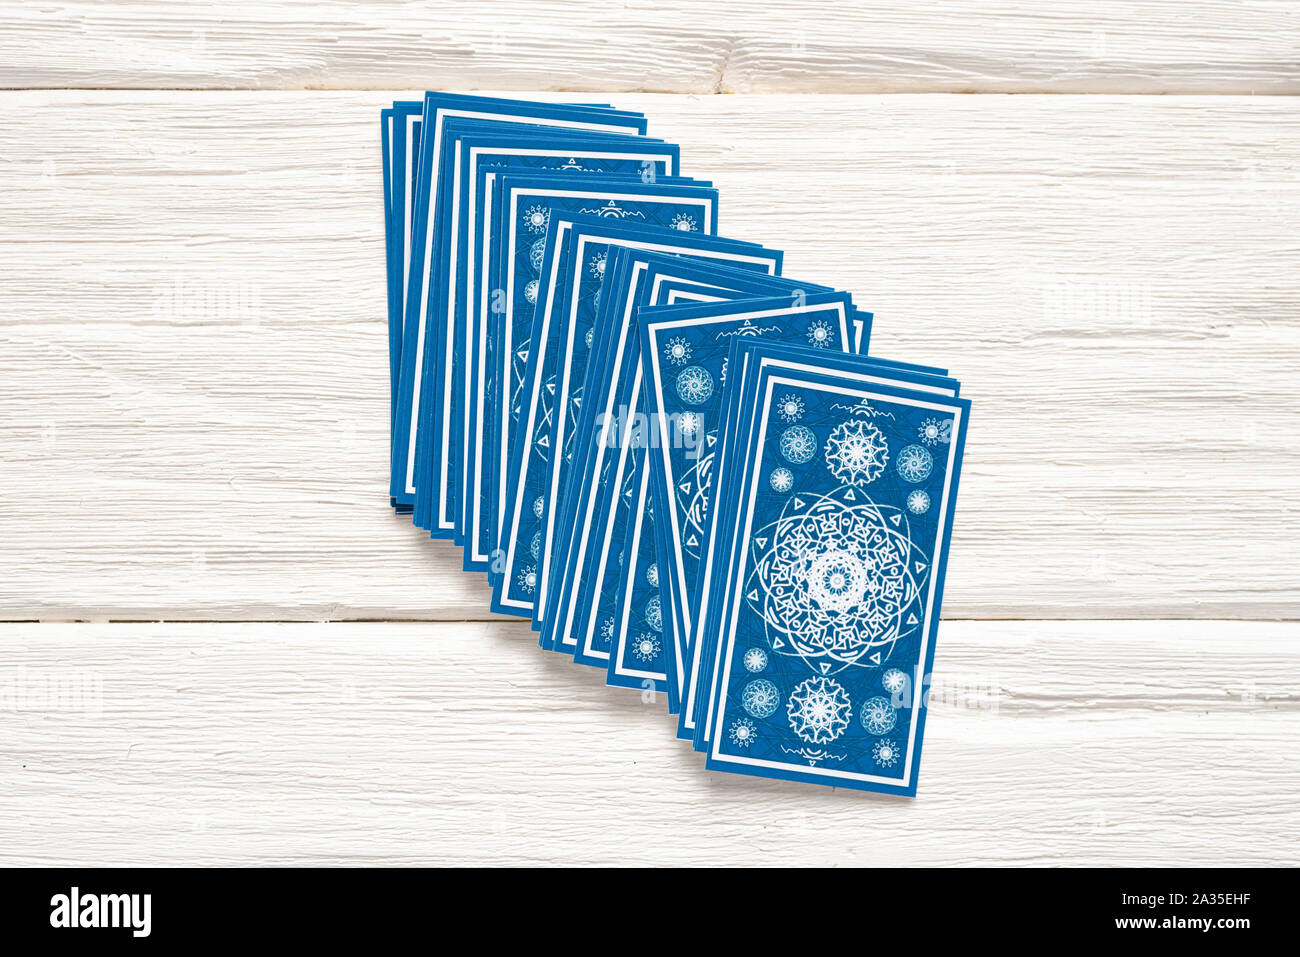 Blue tarot cards deck on white wooden table background Stock Photo - Alamy